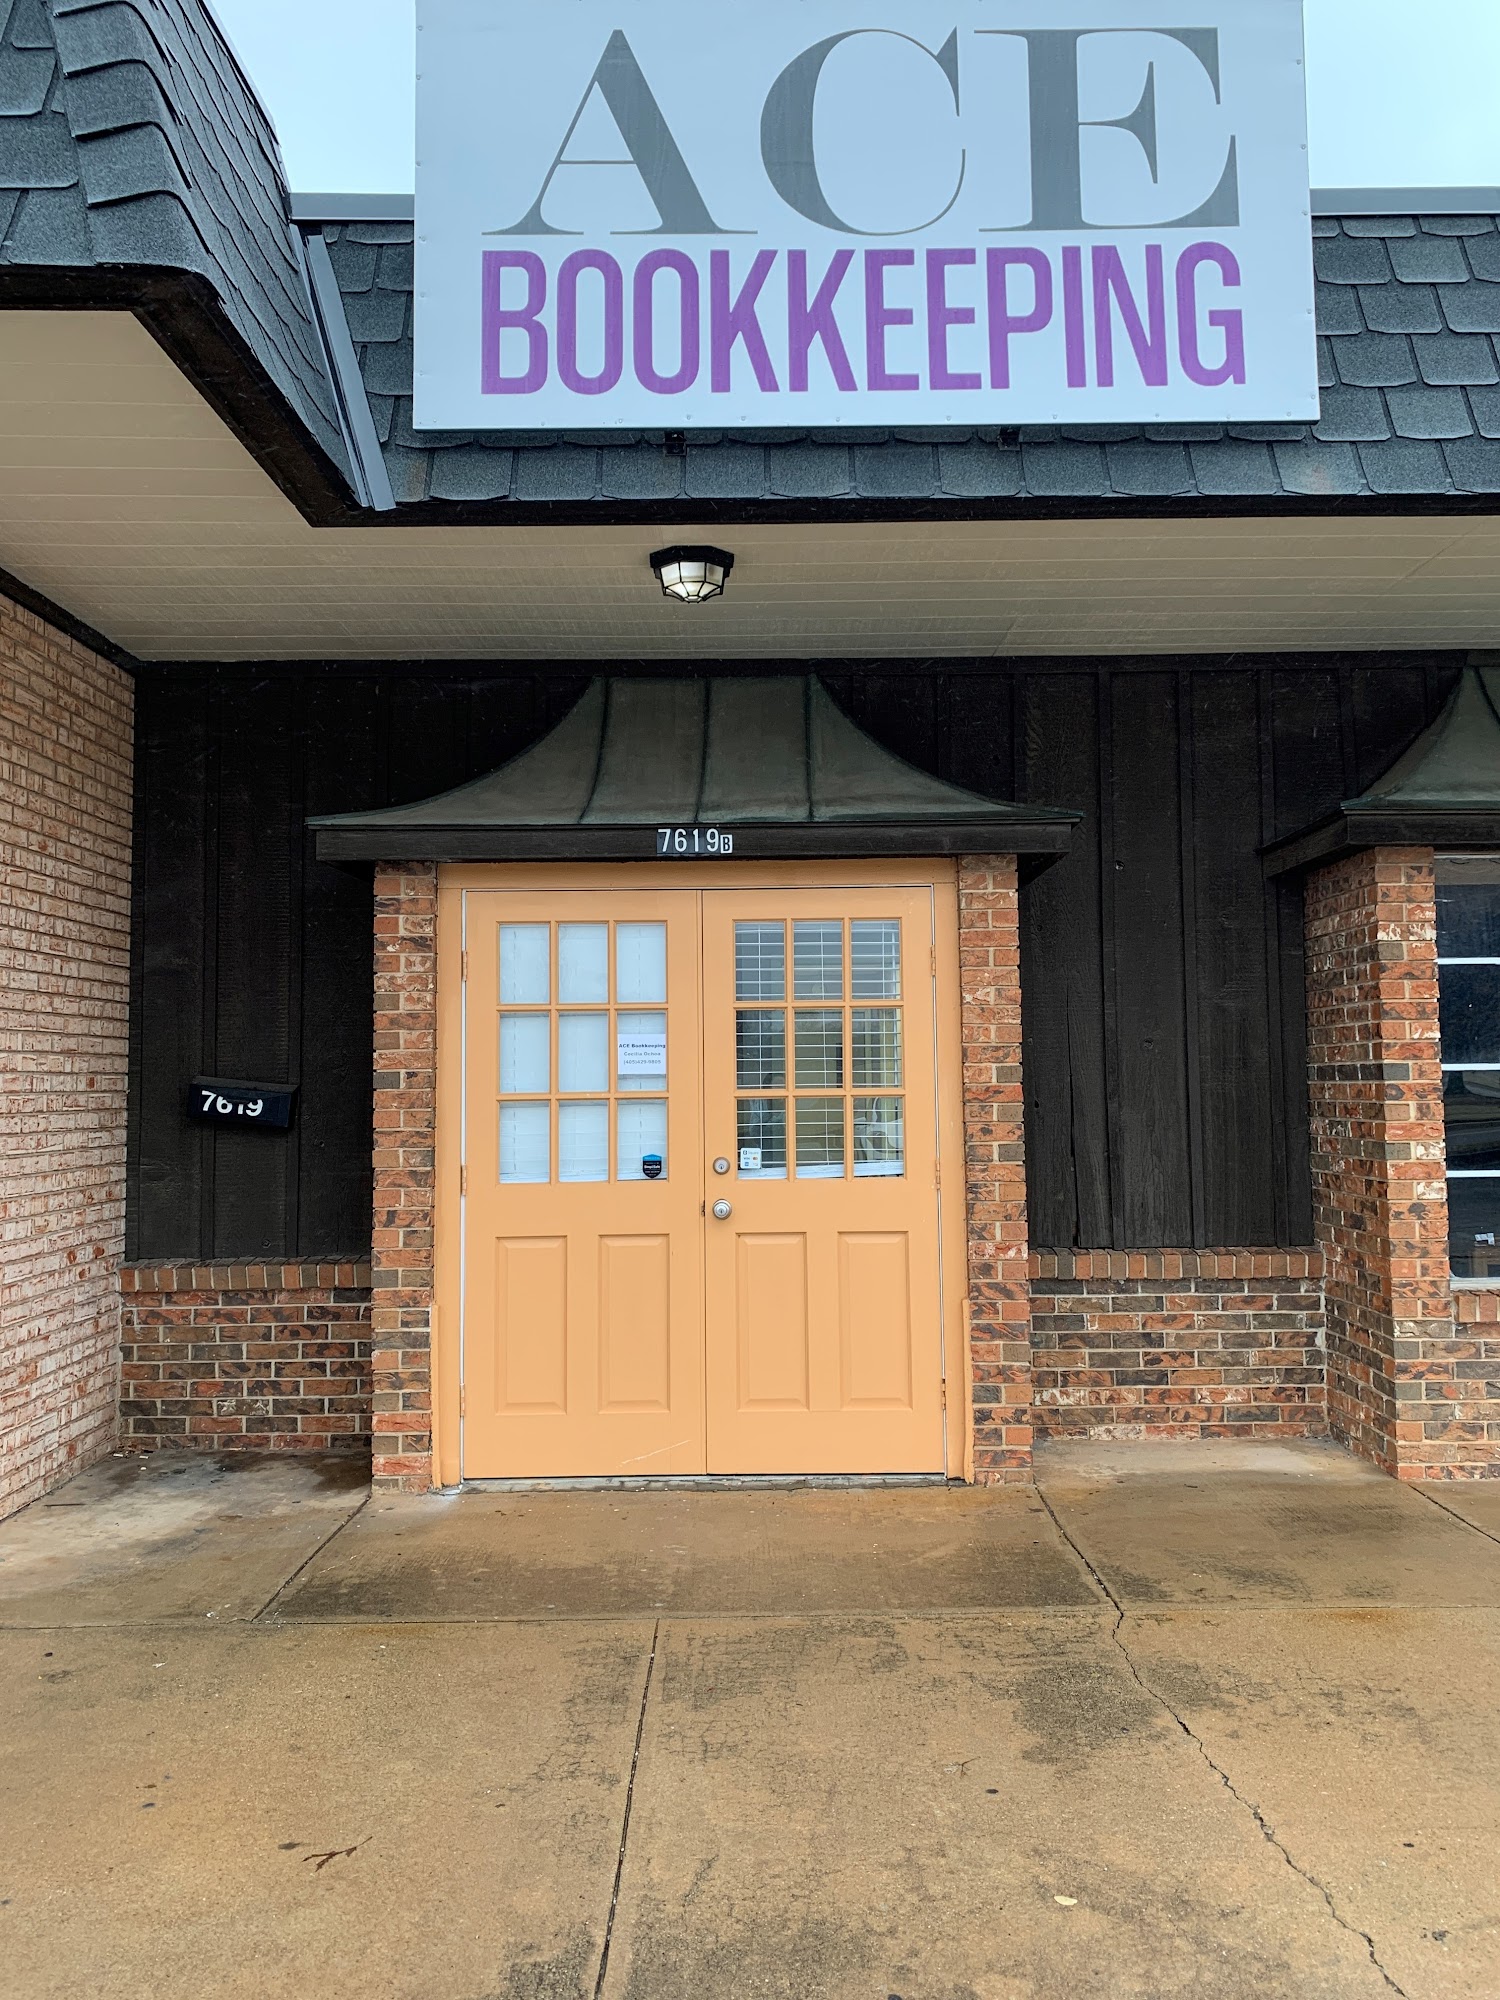 ACE Bookkeeping 7621 NW 23rd St, Bethany Oklahoma 73008